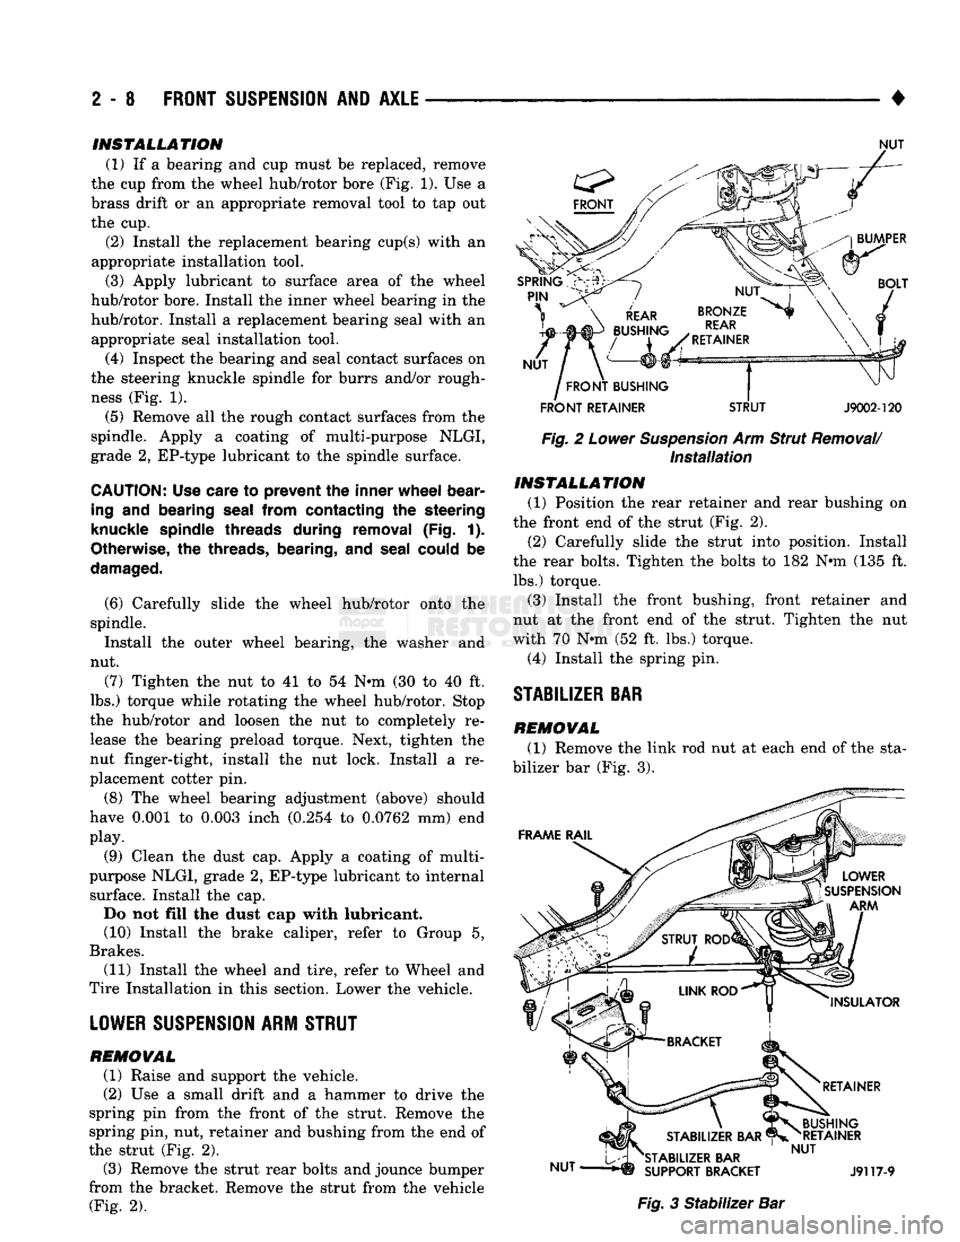 DODGE TRUCK 1993  Service Repair Manual 
2
 - 8
 FRONT SUSPENSION
 AND
 AXLE 

• INSTALLATION 
(1) If a bearing and cup must be replaced, remove 
the cup from the wheel hub/rotor bore (Fig. 1). Use a 
brass drift or an appropriate removal